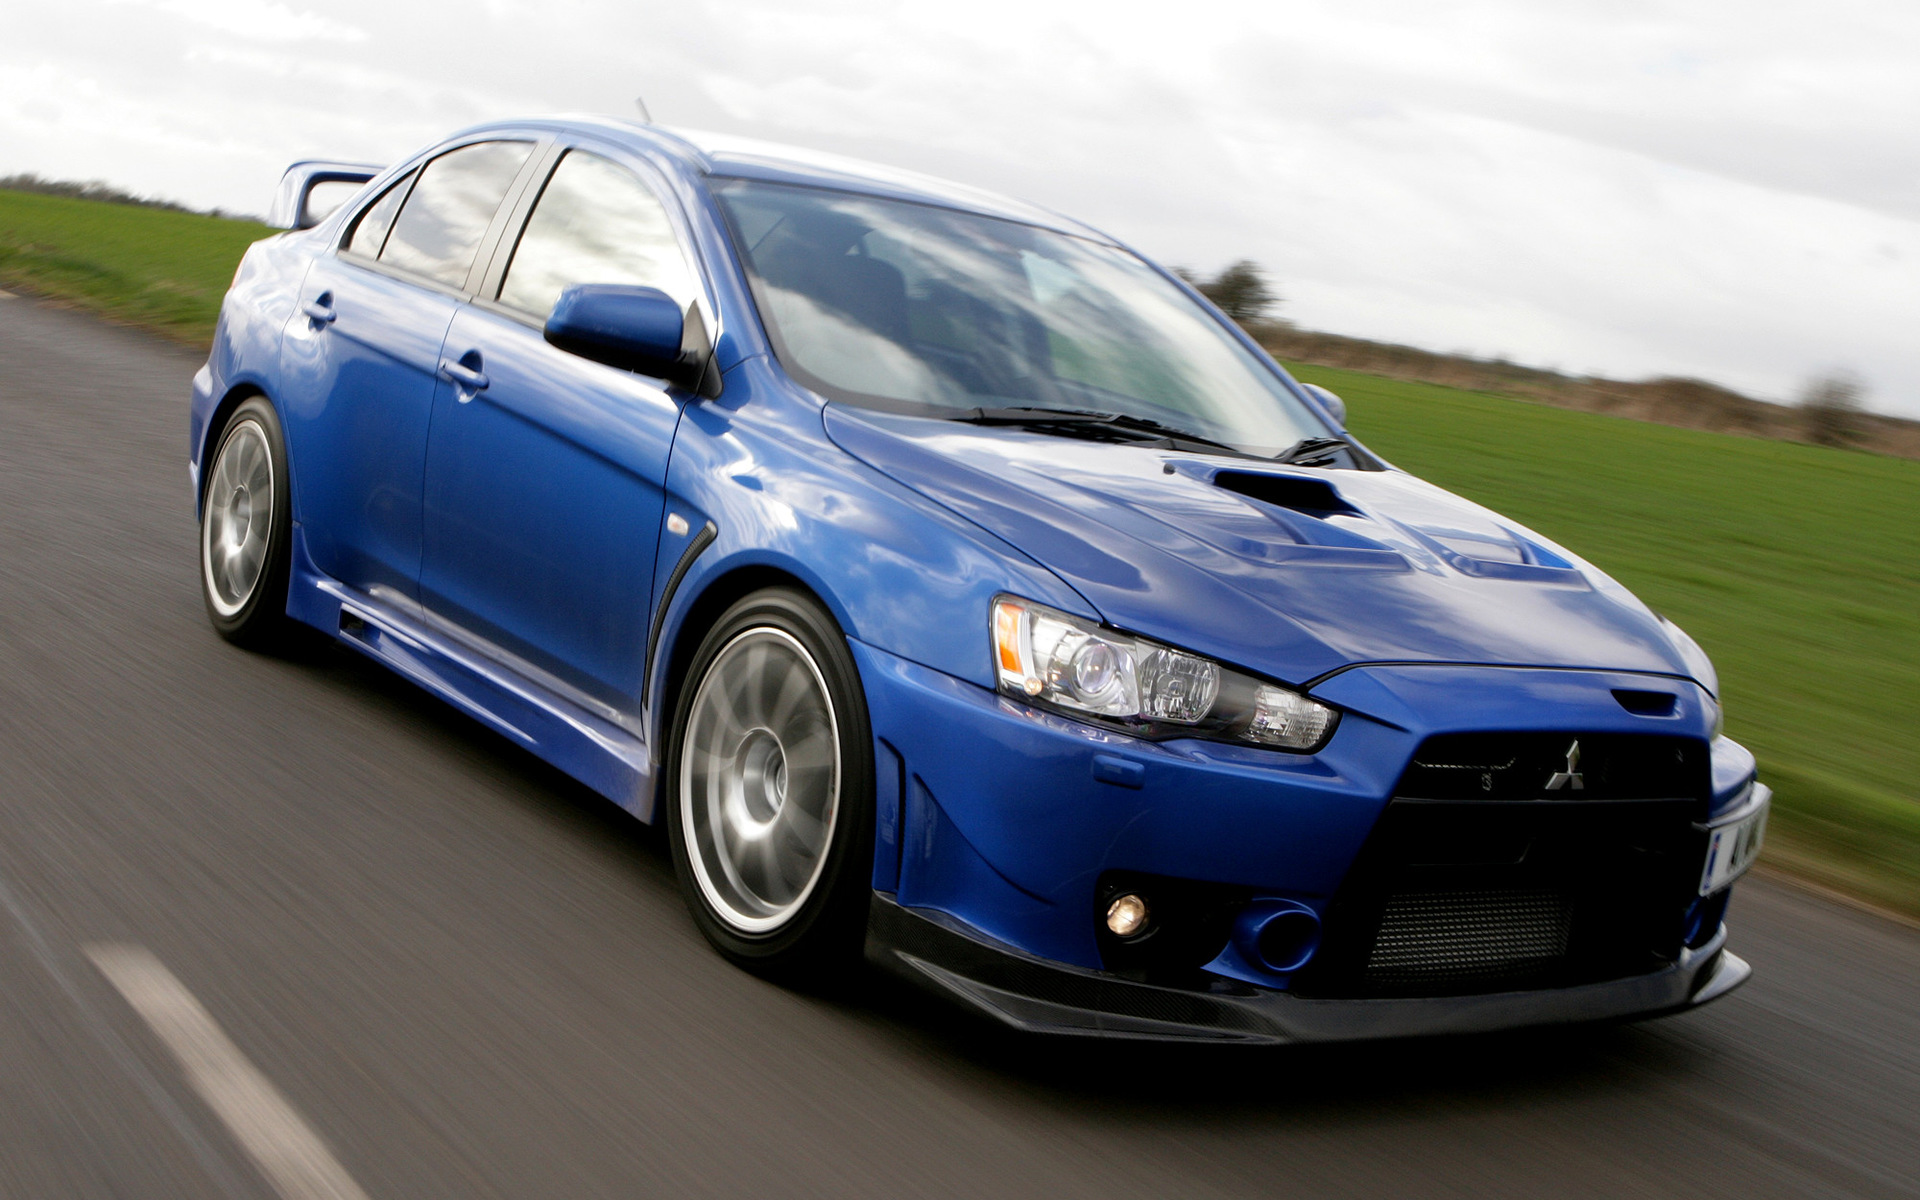 2009 Mitsubishi Lancer Evolution X FQ-400 - Wallpapers and HD Images.